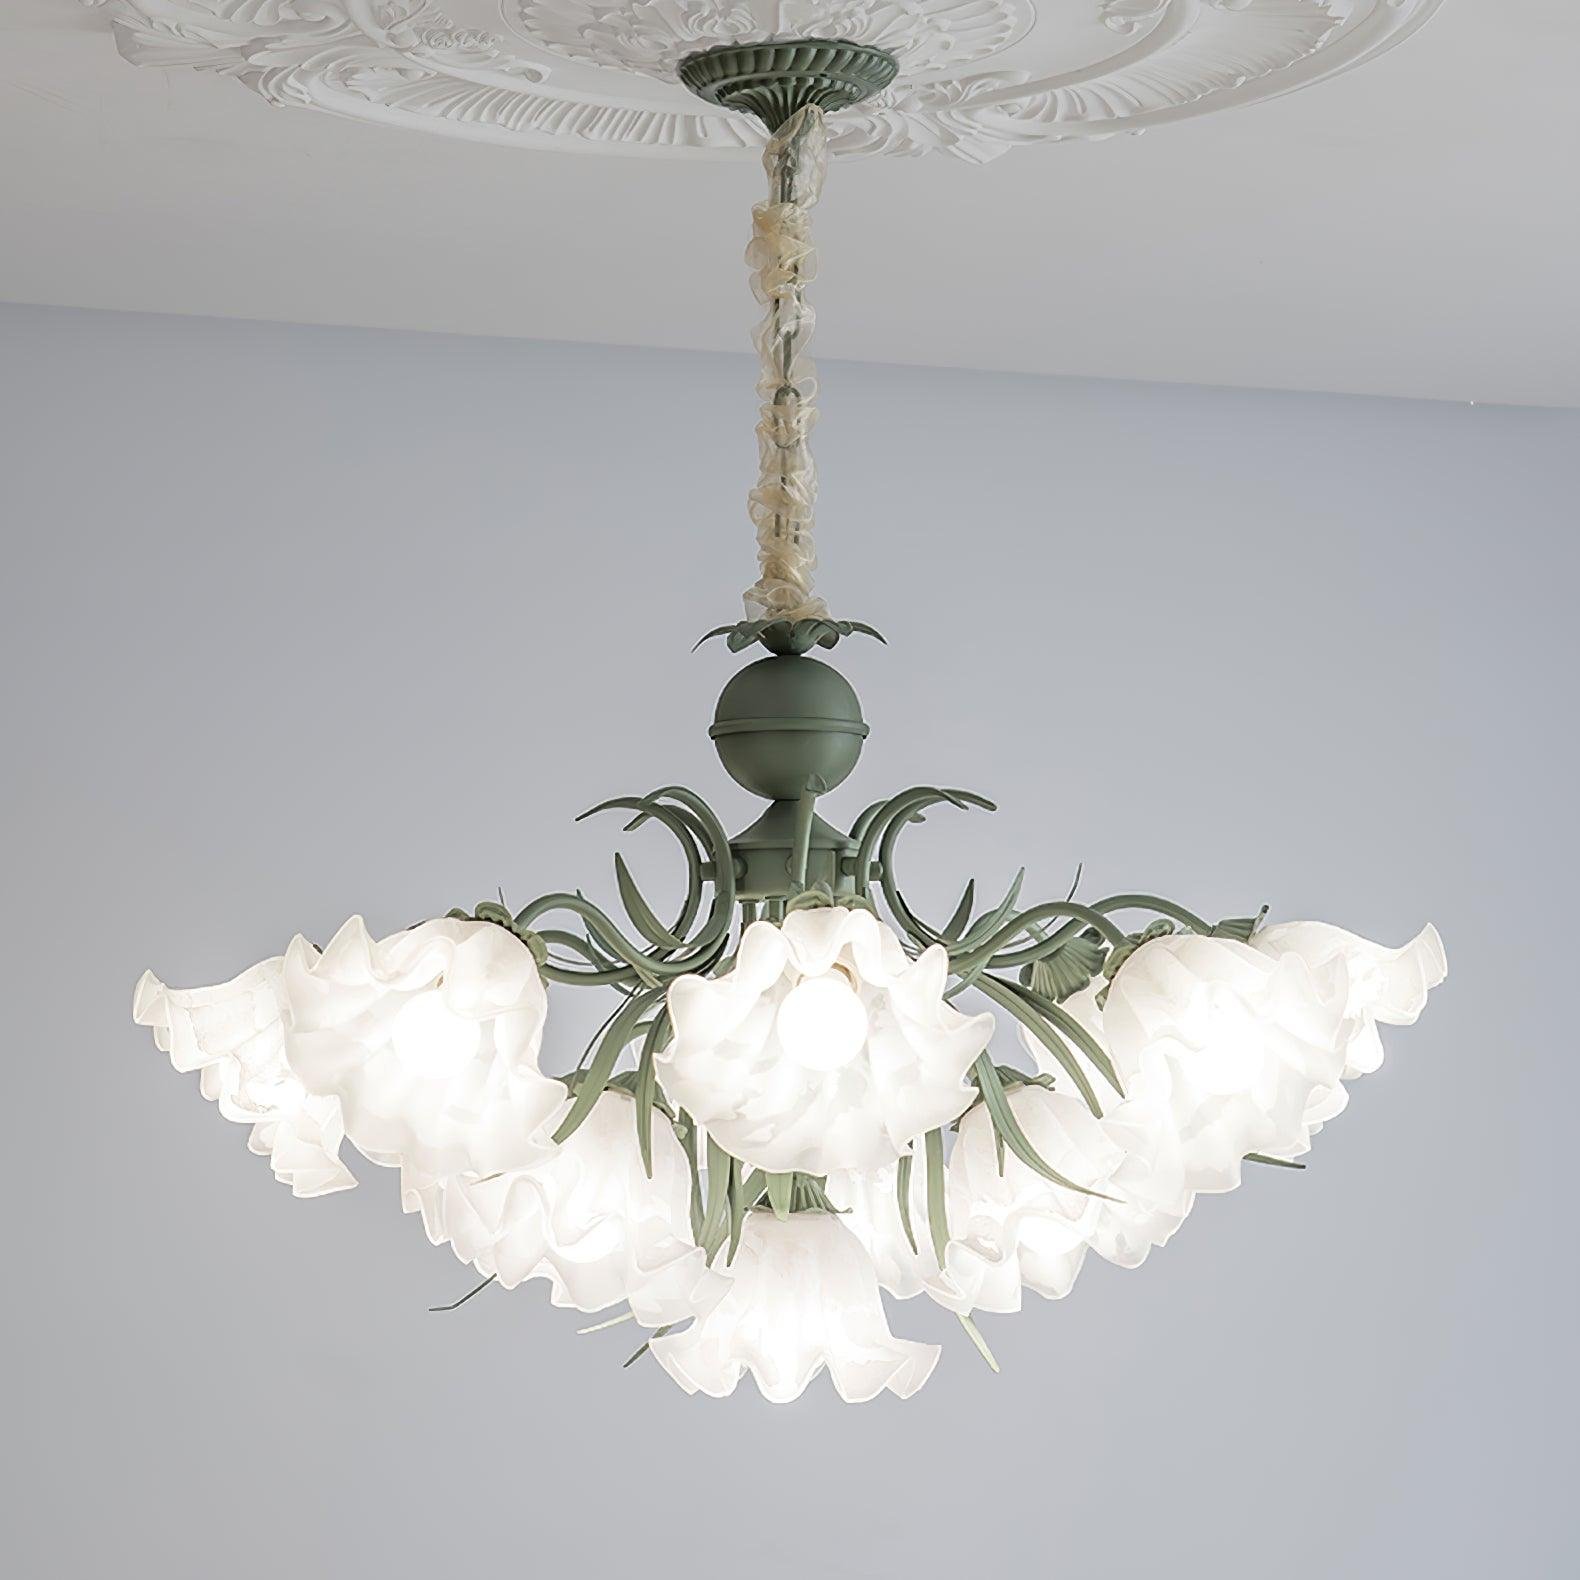 Green Lily of the Valley Flower Chandelier with 13 Heads, Measurements: Diameter 37.8 inches x Height 26.8 inches (96cm x 68cm)